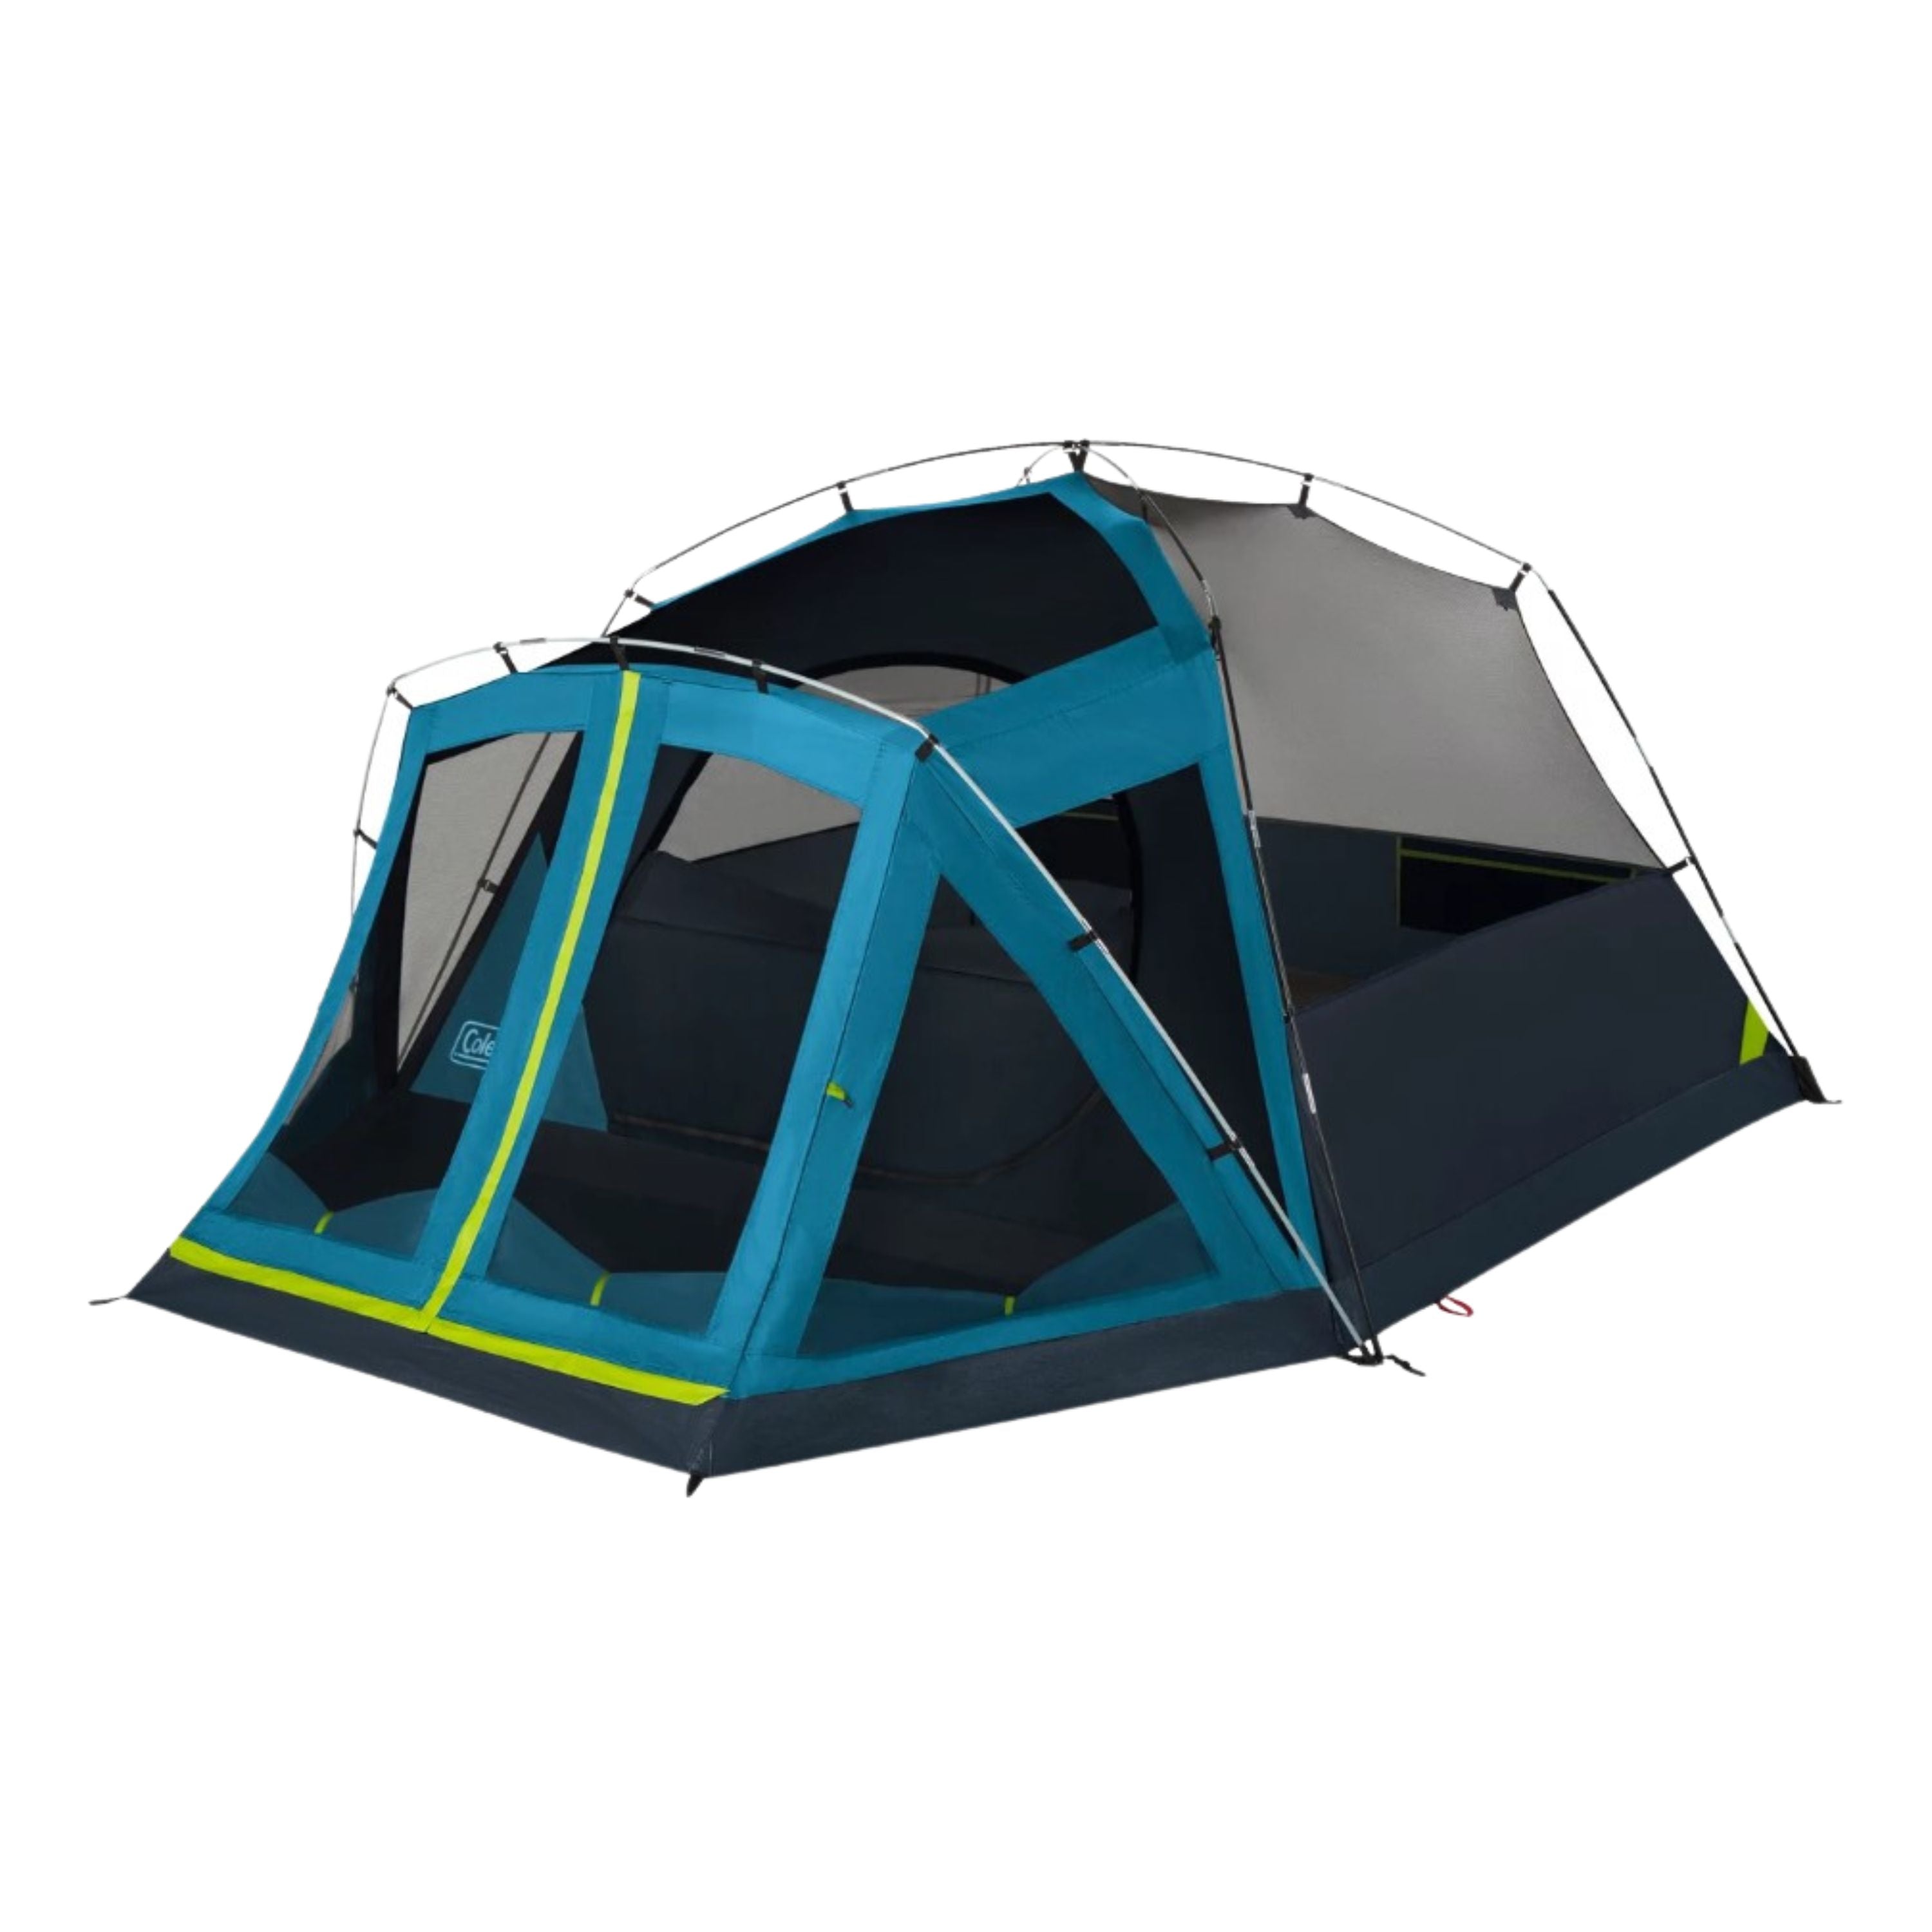 "Skydome" Tent - 4 persons